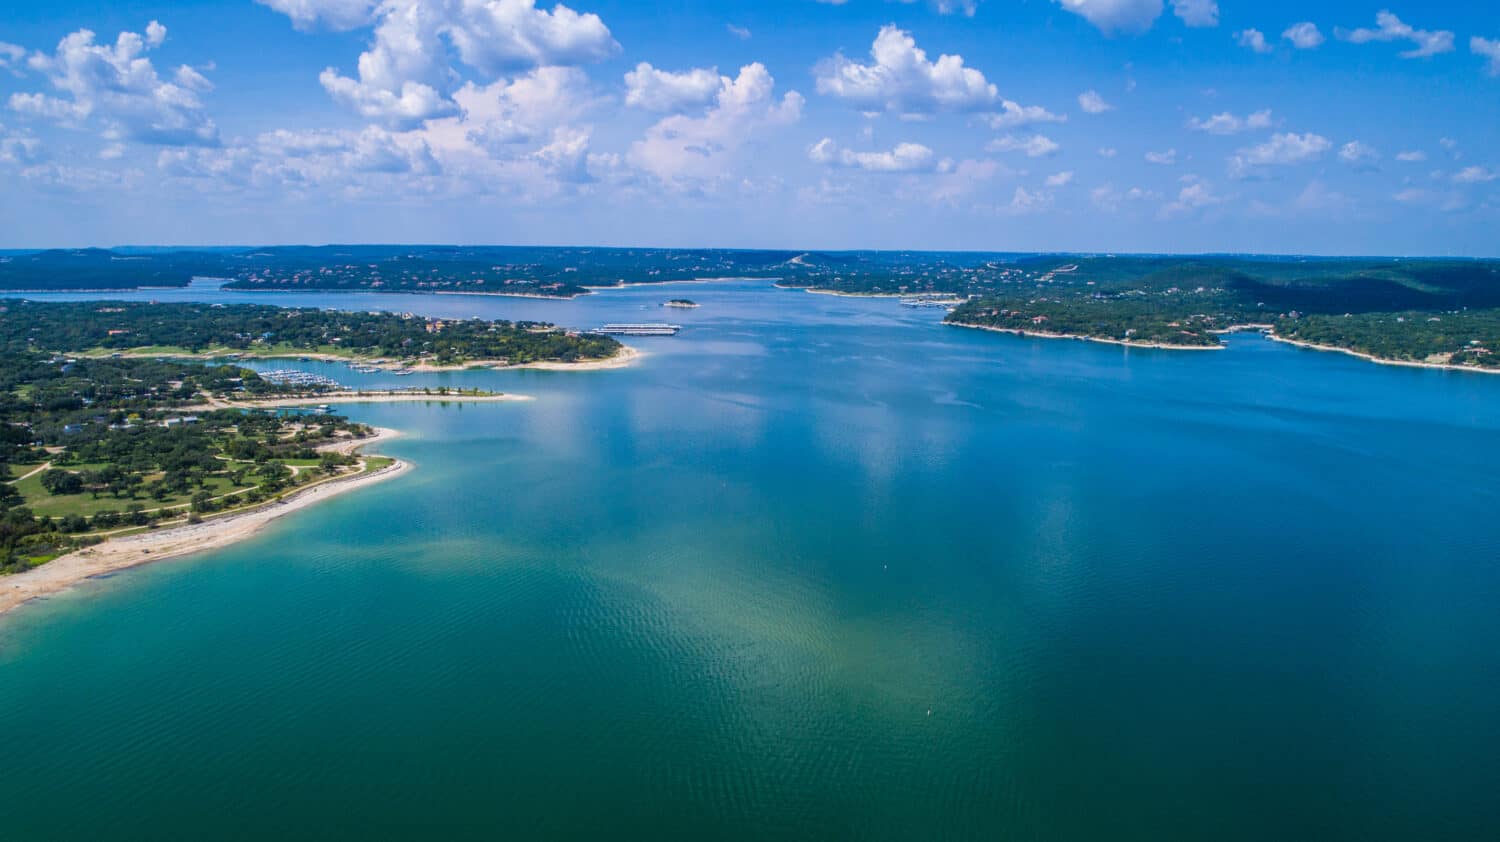 Reflections on the water Lake Travis a paradise of clear blue water and relaxation right outside Austin Texas an amazing summer landscape on the lake aerial drone view high above lake